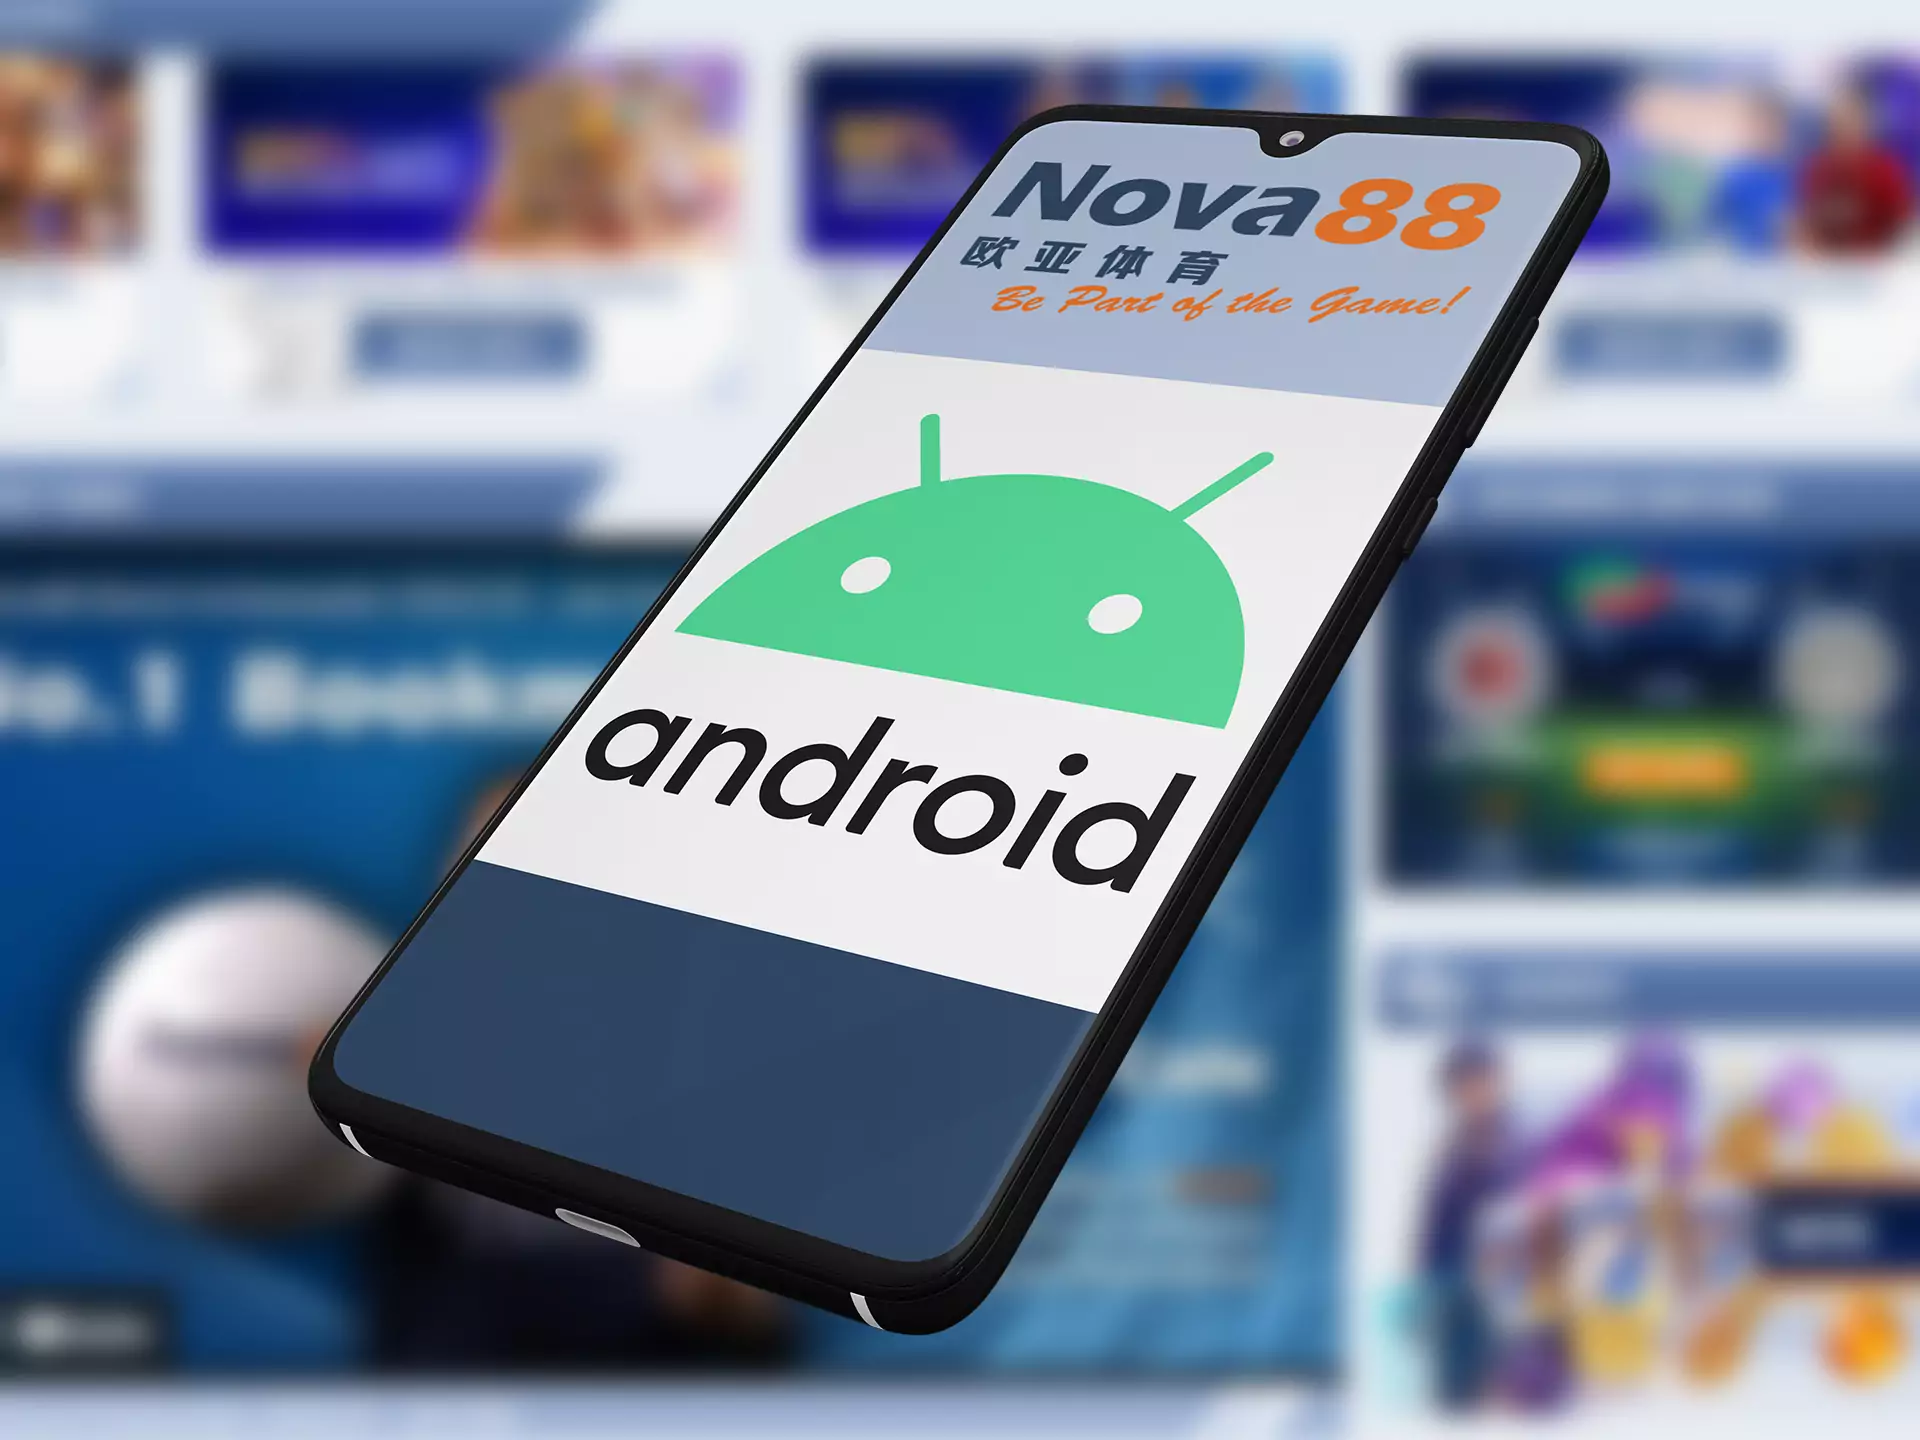 Nova88 app supports many of android devices.